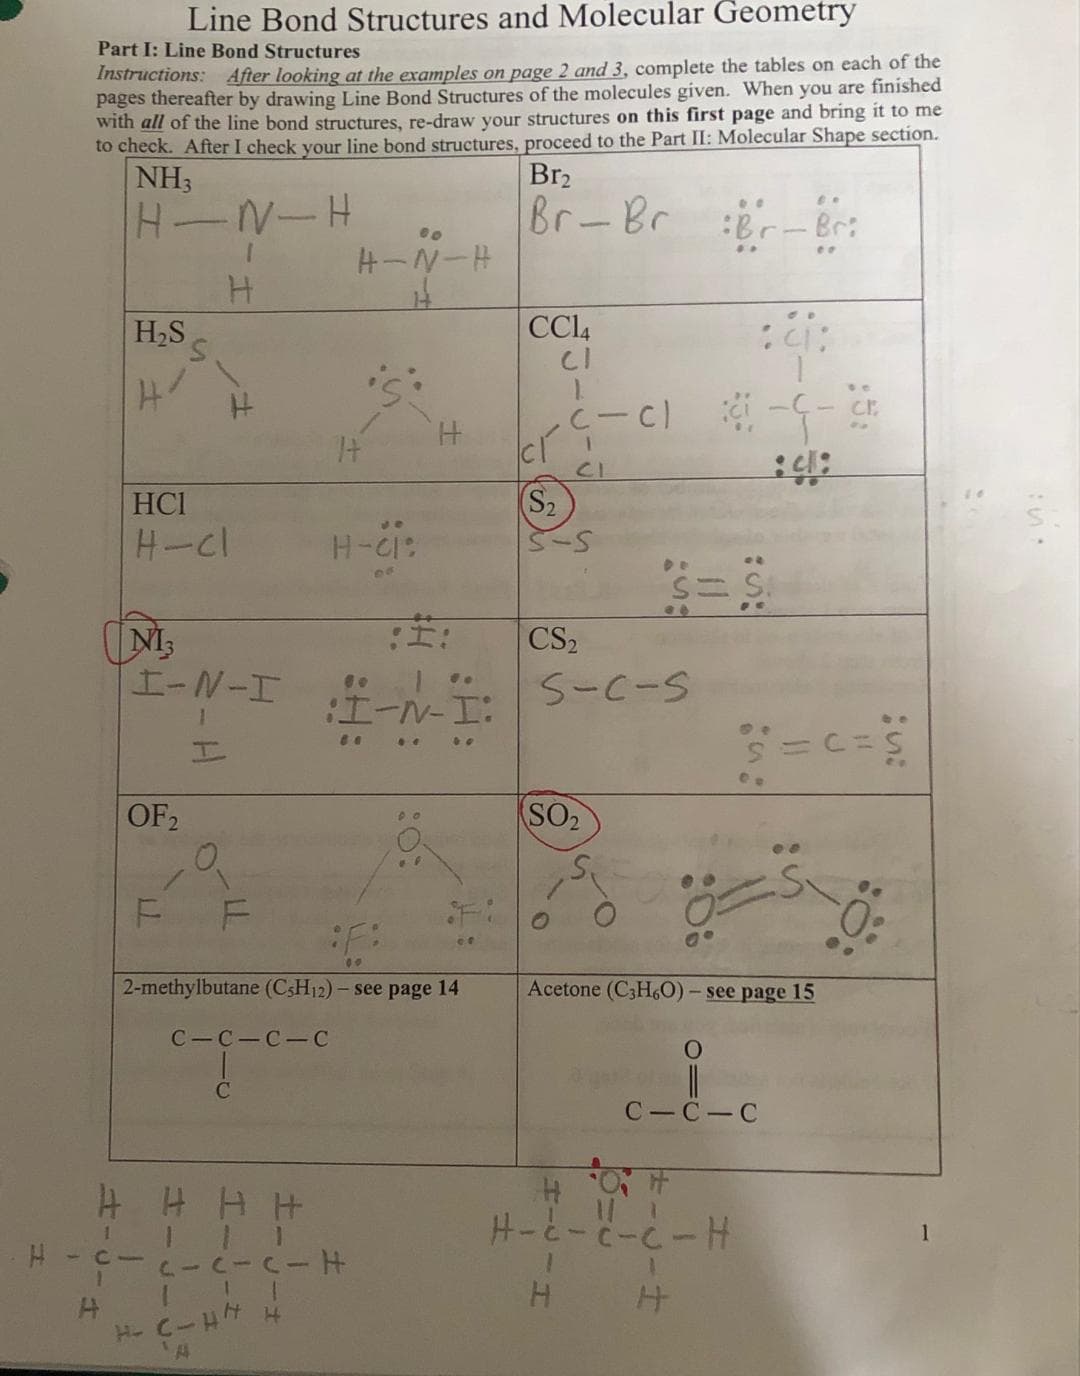 H
Part I: Line Bond Structures
Instructions: After looking at the examples on page 2 and 3, complete the tables on each of the
pages thereafter by drawing Line Bond Structures of the molecules given. When you are finished
with all of the line bond structures, re-draw your structures on this first page and bring it to me
to check. After I check your line bond structures, proceed to the Part II: Molecular Shape section.
NH3
Br₂
H-N-H
Br-Br Br-Bri
H
H₂S
H
1
Line Bond Structures and Molecular Geometry
HCI
H-cl
OF 2
H
NI3
I-N-I
1
I
F
F
HHHH
C-C-C-C
--C
C
H-N-H
14
H-C-H7 H
A
H-CI:
| ..
:I-N-I:
2-methylbutane (C5H12) - see page 14
80
CICICIT
1
H
CC14
CI
.c-cl
cr
C-C1-C-C
1
CI
(S₂
S-S
CS₂
S-C-S
SO₂
:ci:
et
S= S
agu ol
Acetone (C3H6O) - see page 15
O
HO H
H-ċ-ċ-C-H
4
41:
be
S=C = S
C-C-C
1
::